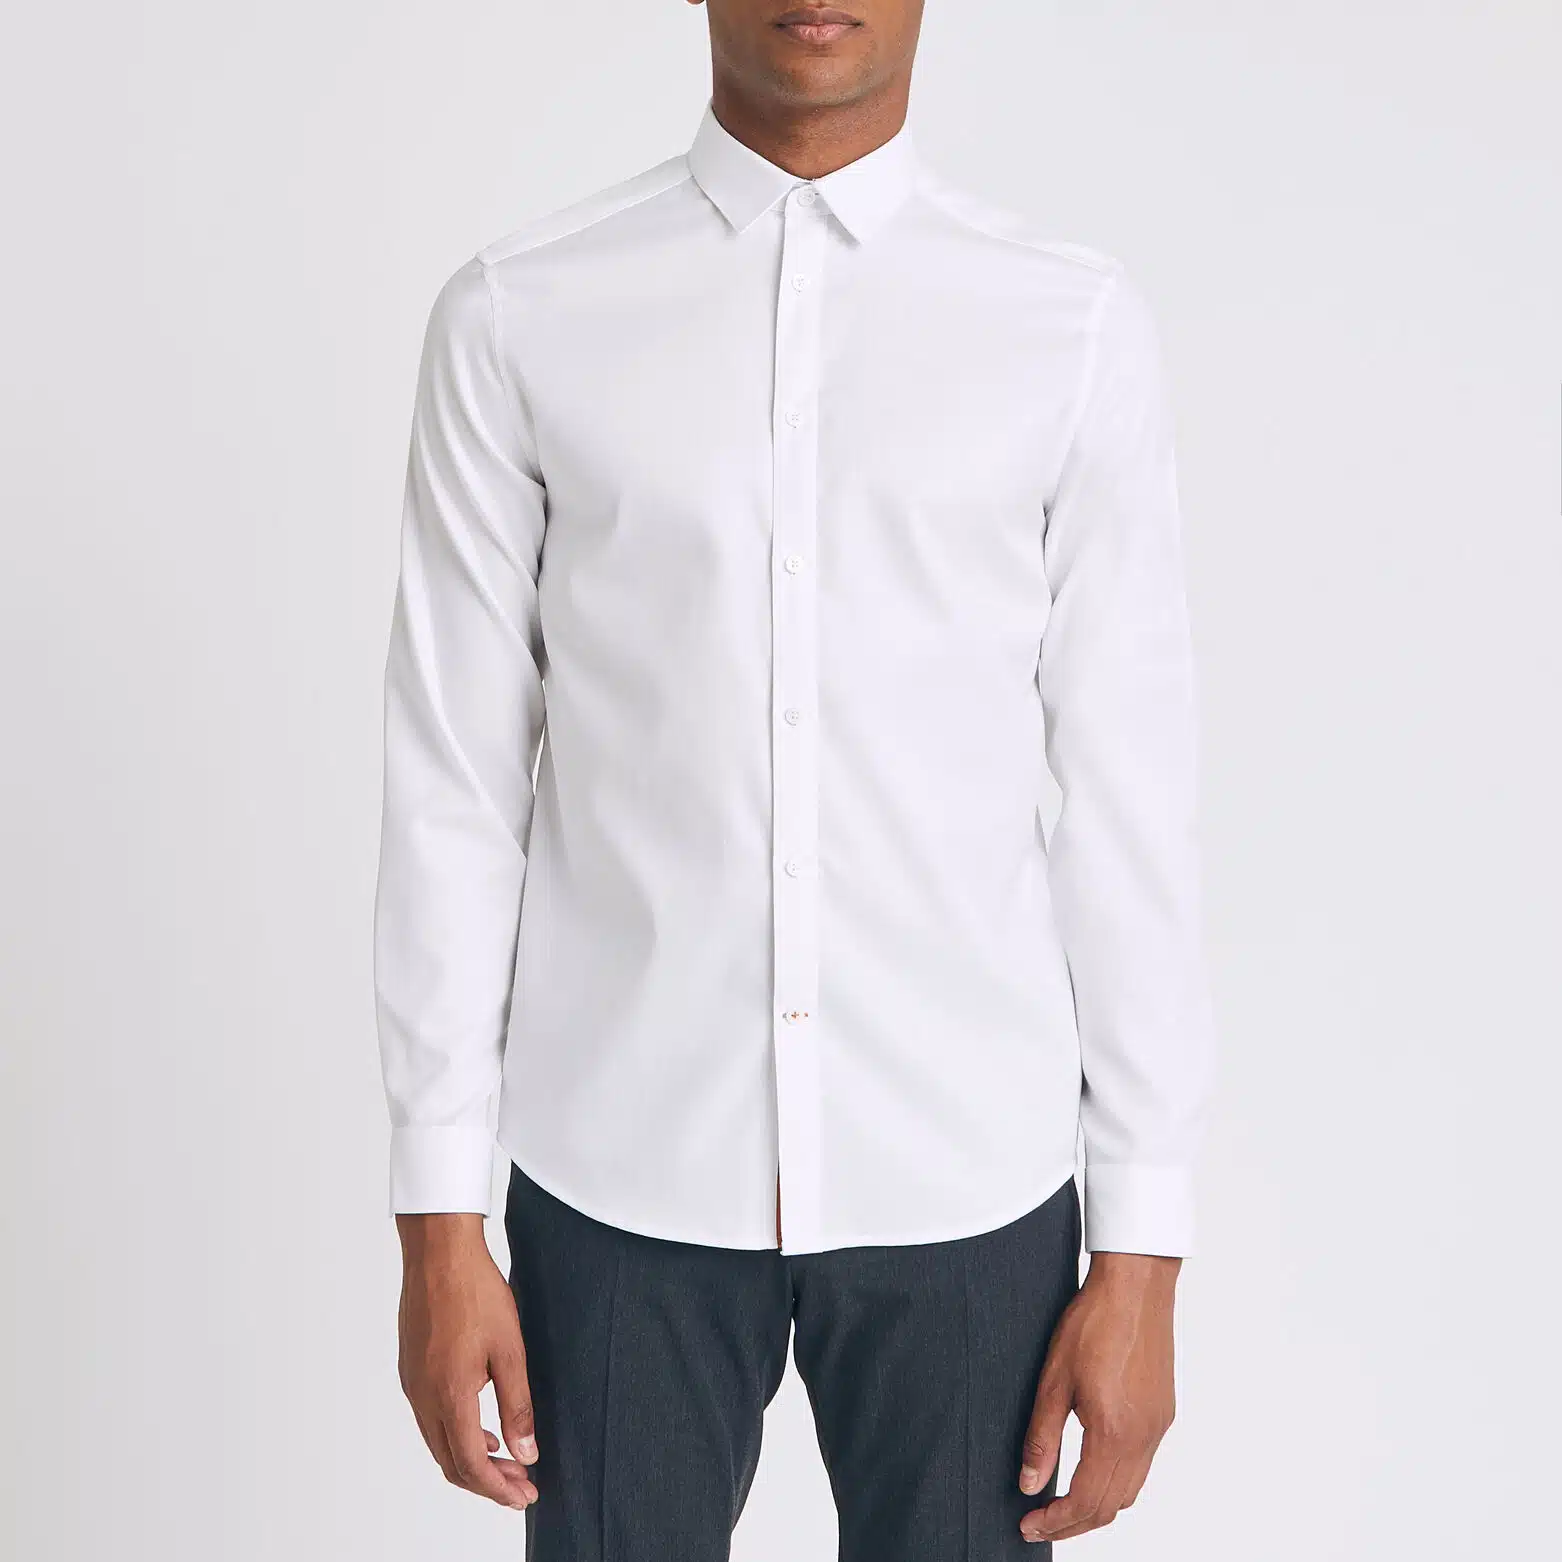 Soldes Jules - chemise blanche